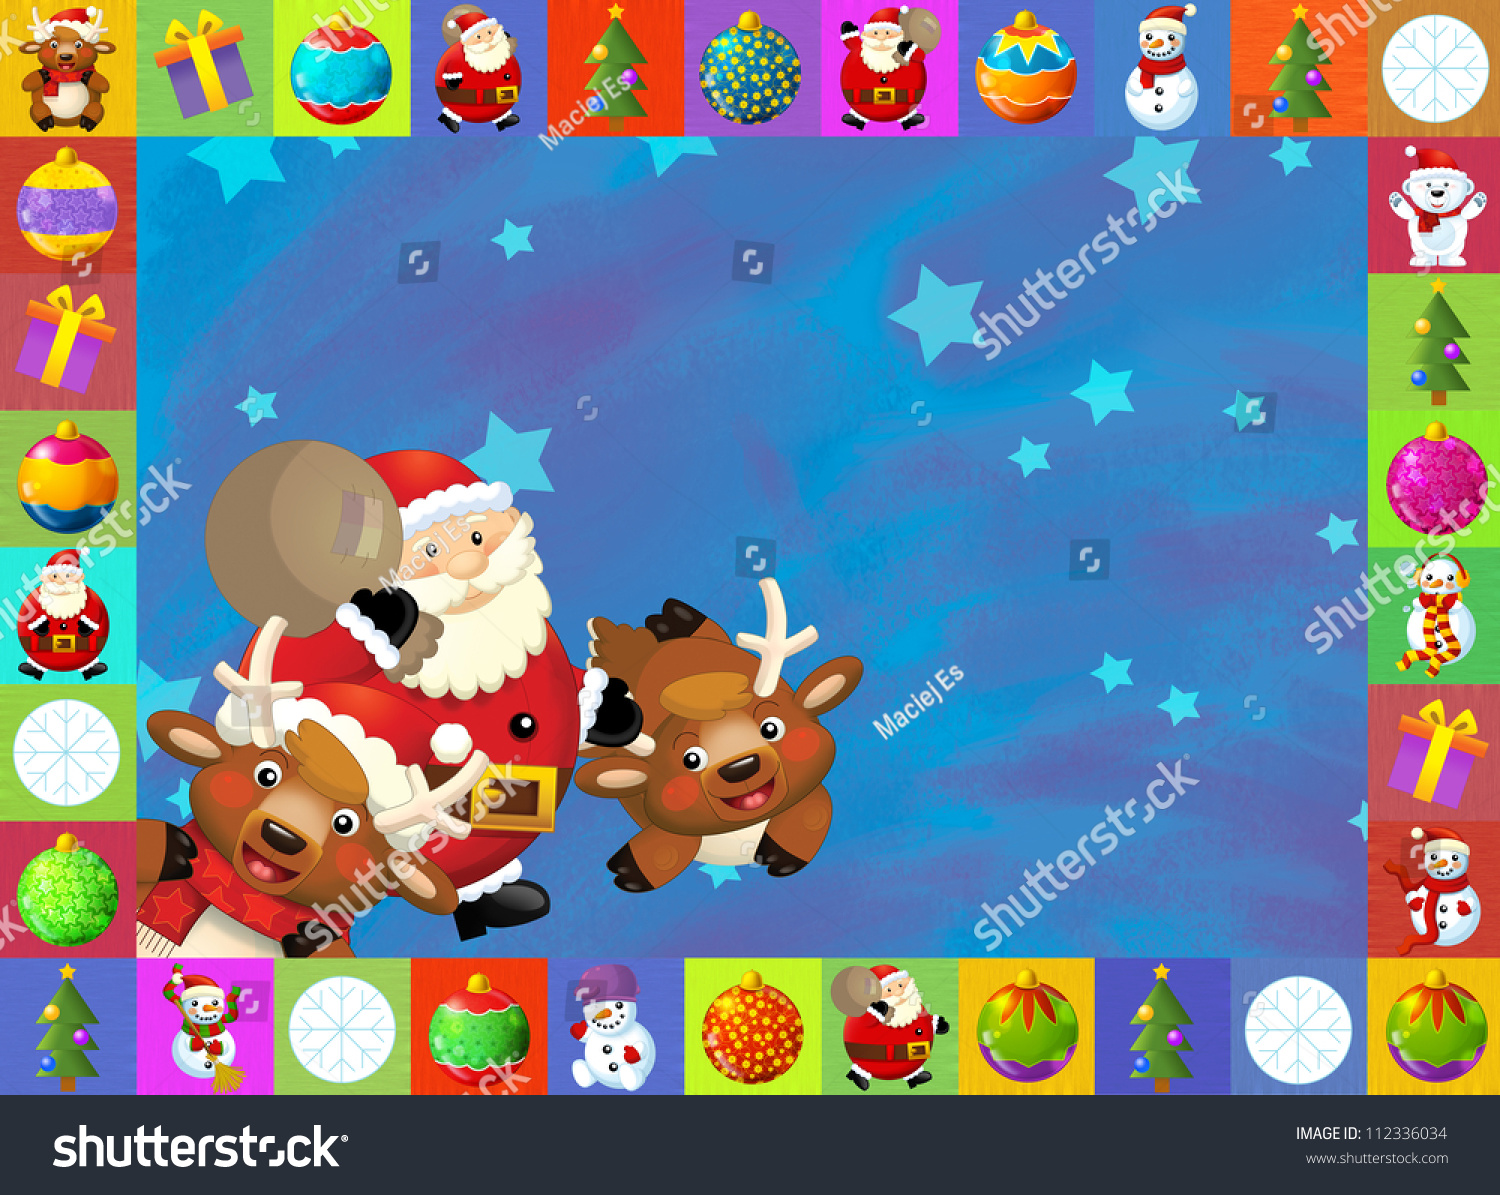 The christmas card with clear background illustration for the children